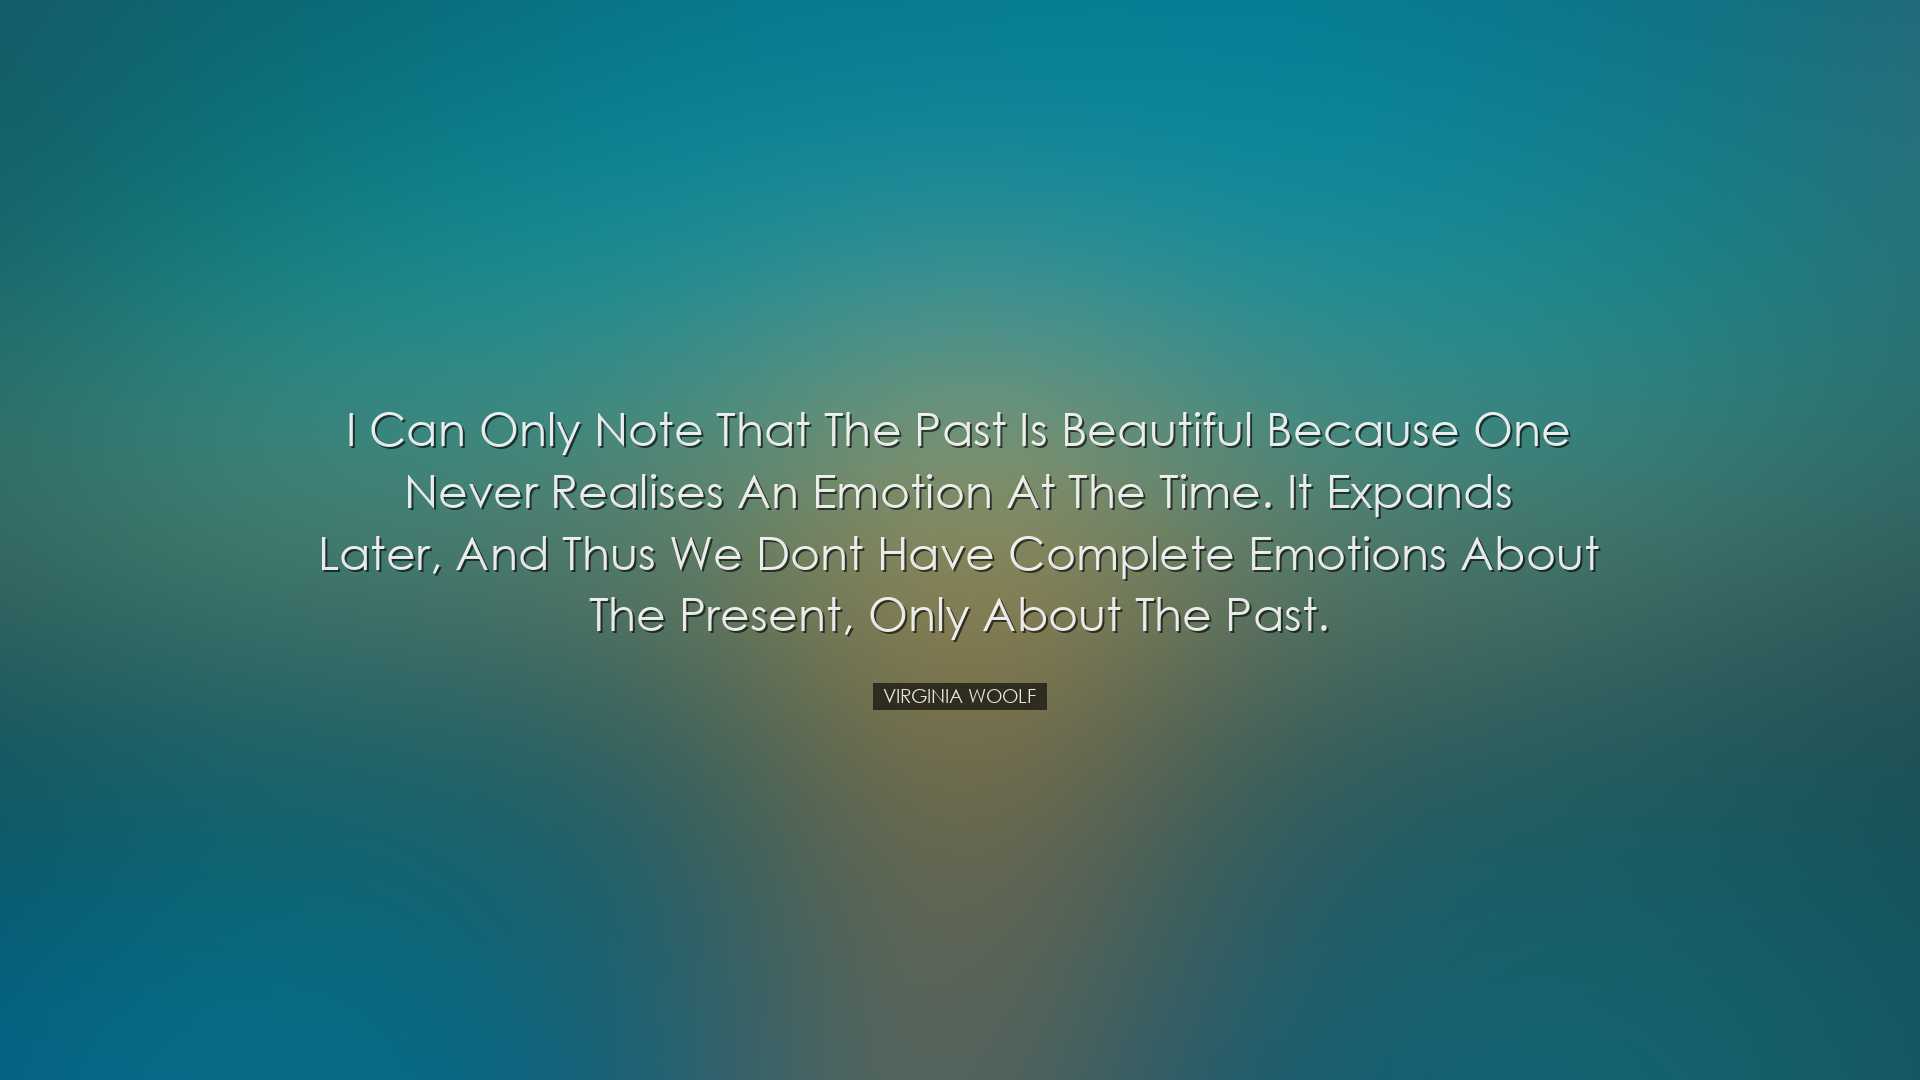 I can only note that the past is beautiful because one never reali